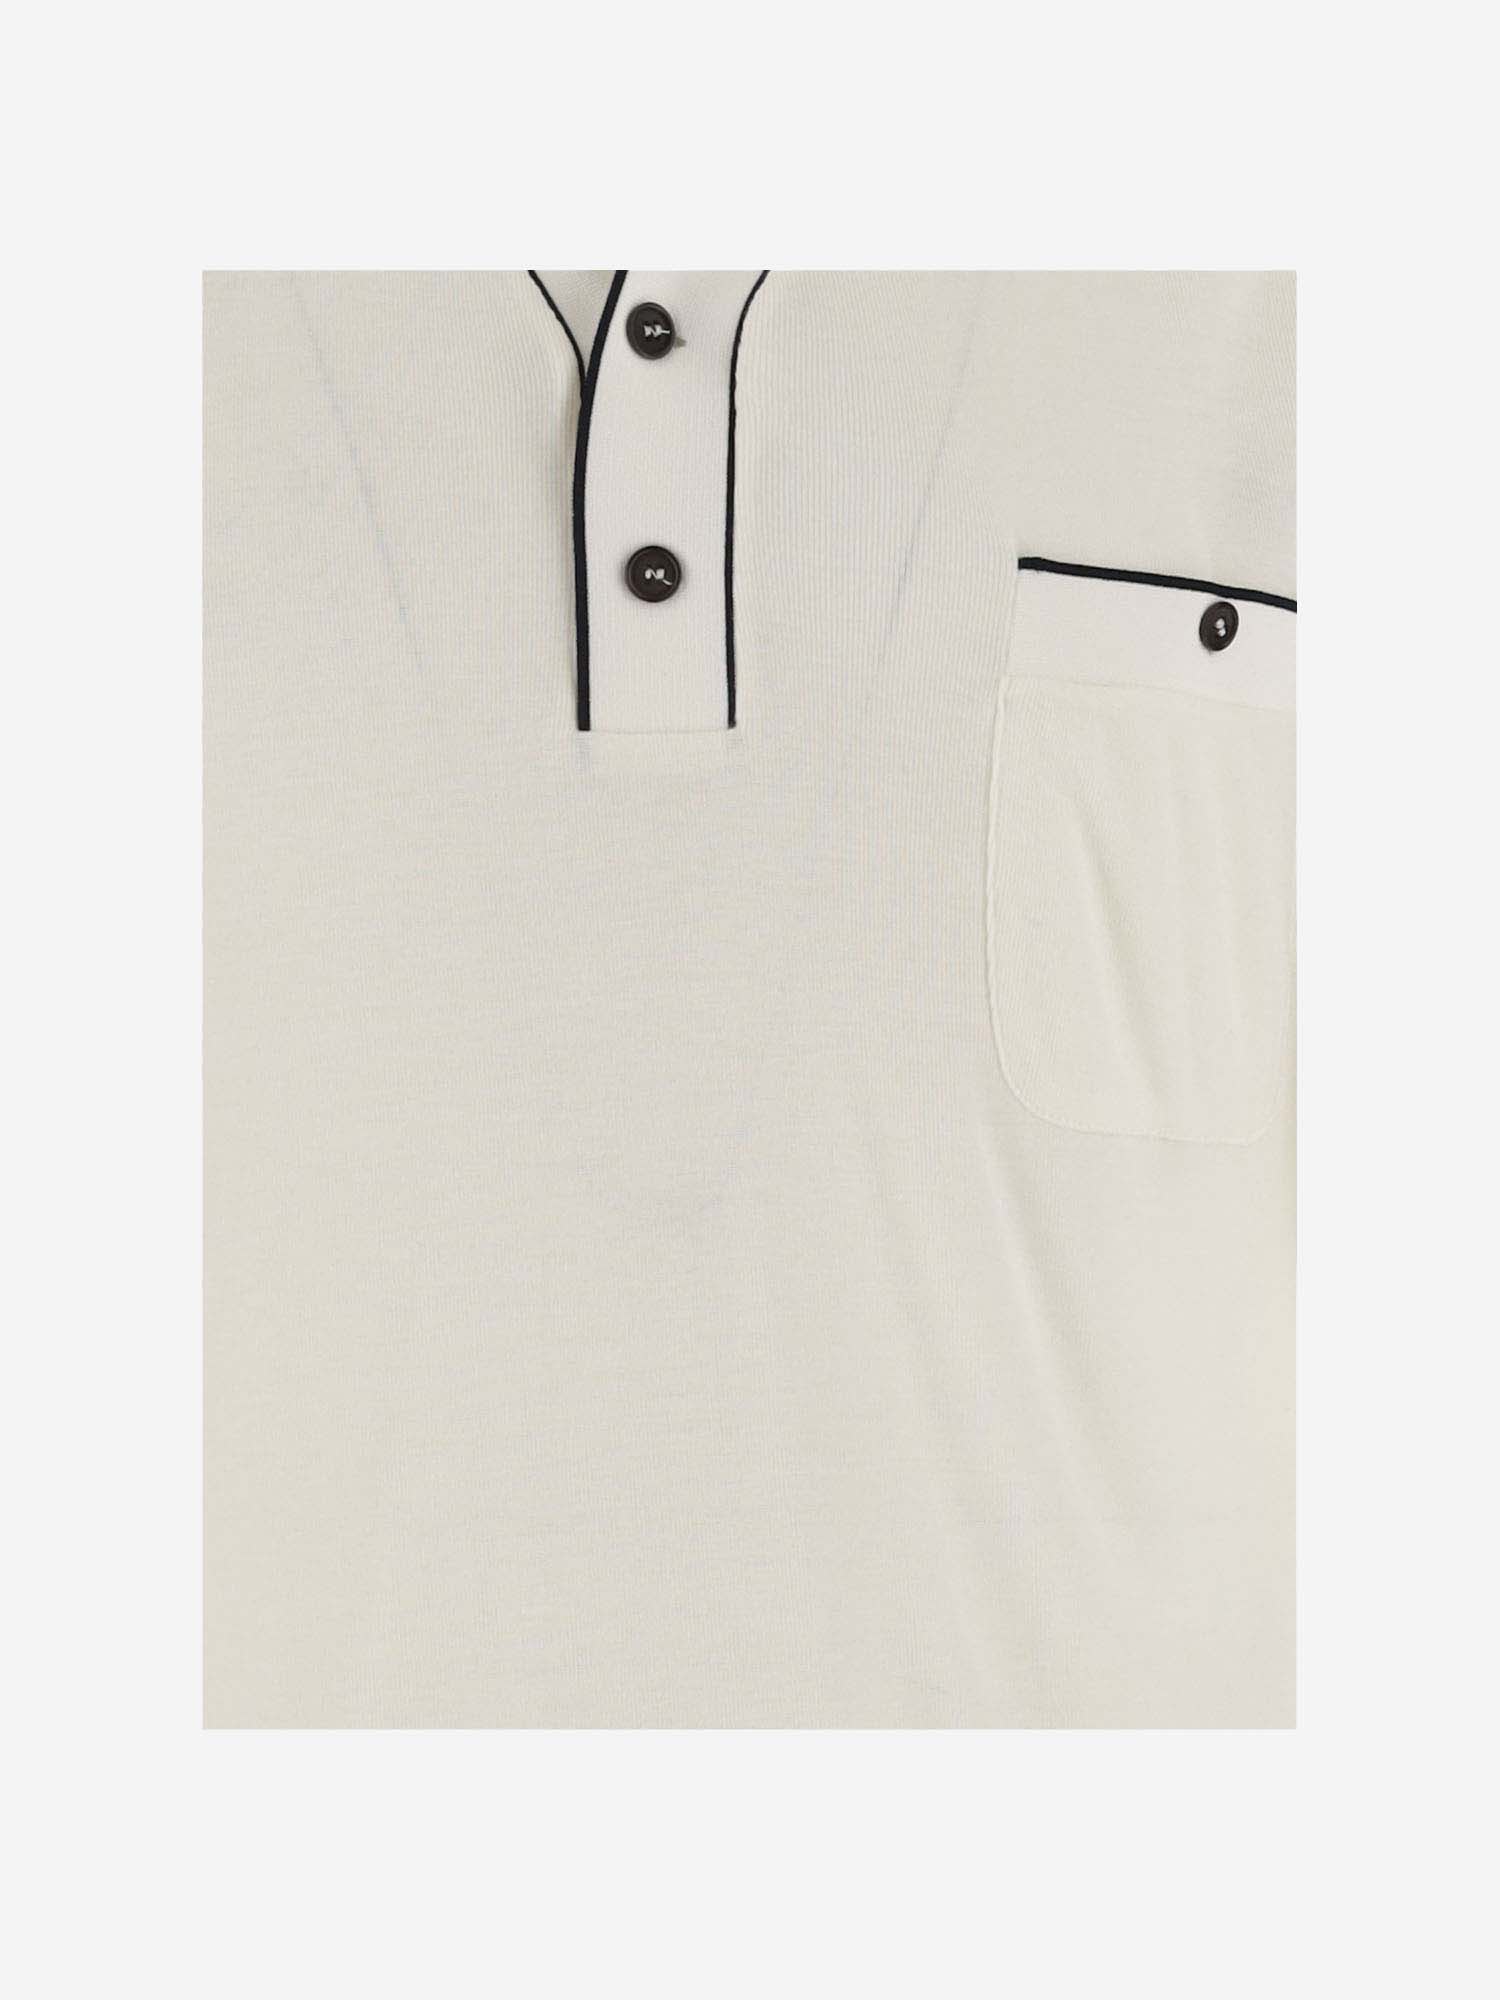 Shop Giorgio Armani Wool And Viscose Blend Polo Shirt In Gesso